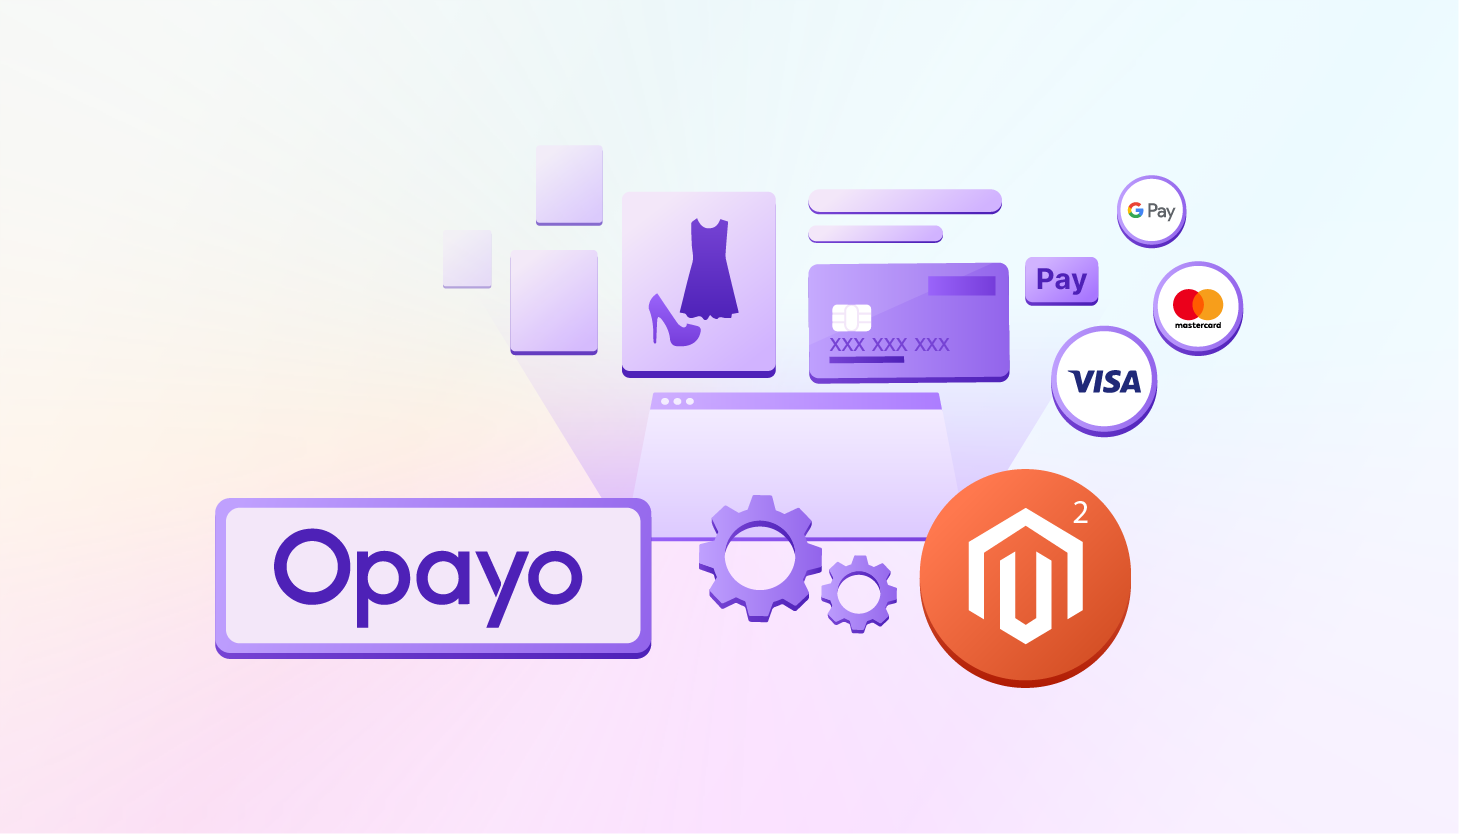 Configuring Opayo Magento 2: Integration of Sage Pay Payment Gateway